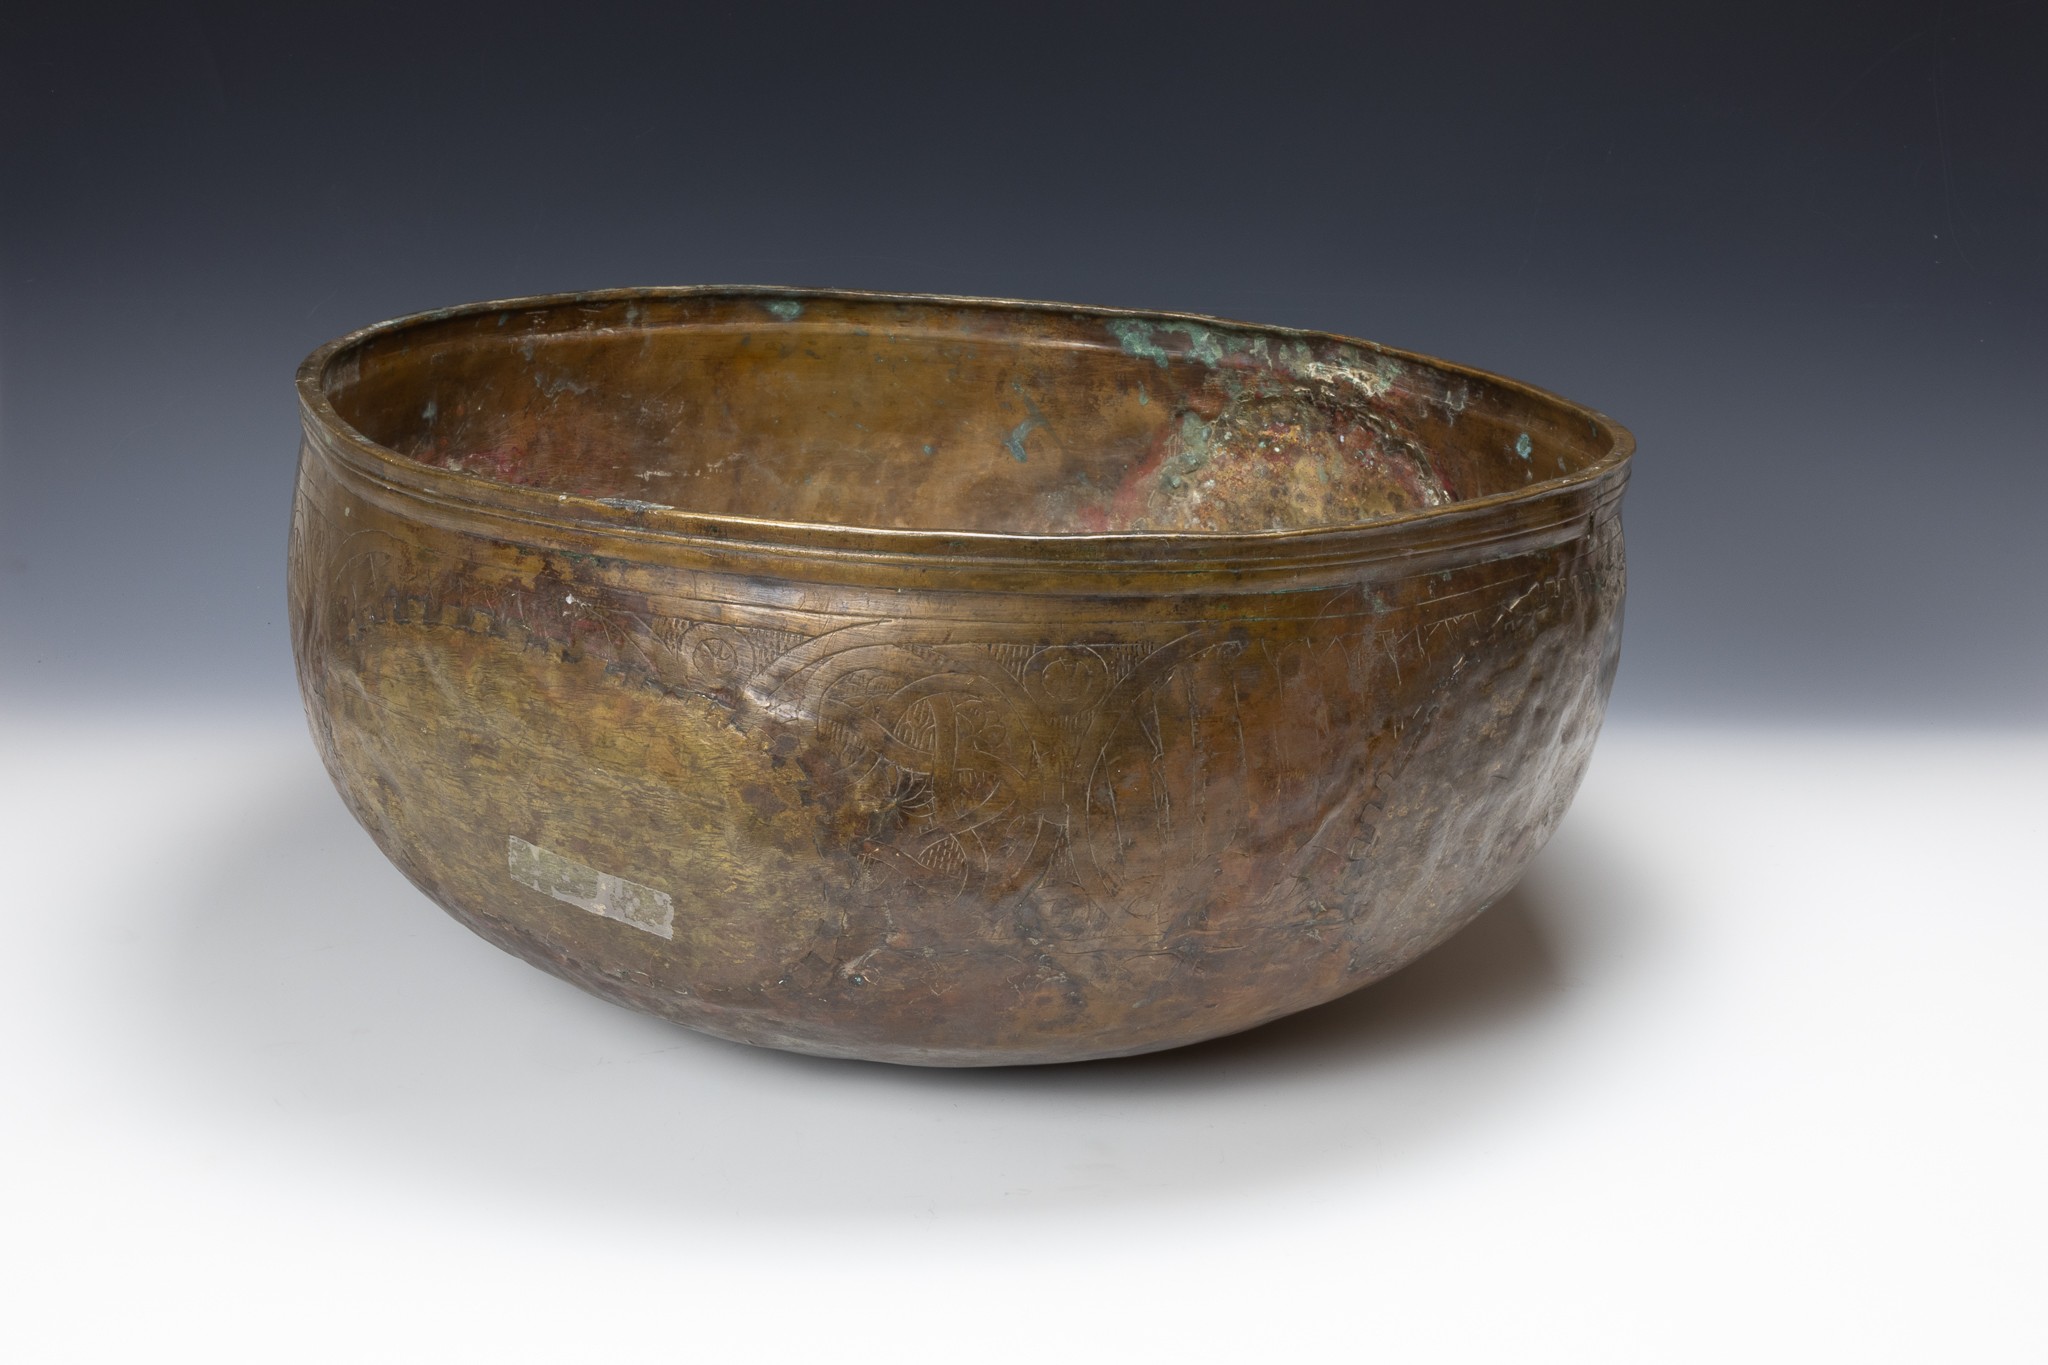 A Large Islamic Mamluk Brass Bowl from the 15th Century with Islamic Calligraphy Engraving.

D: Appr - Image 2 of 2